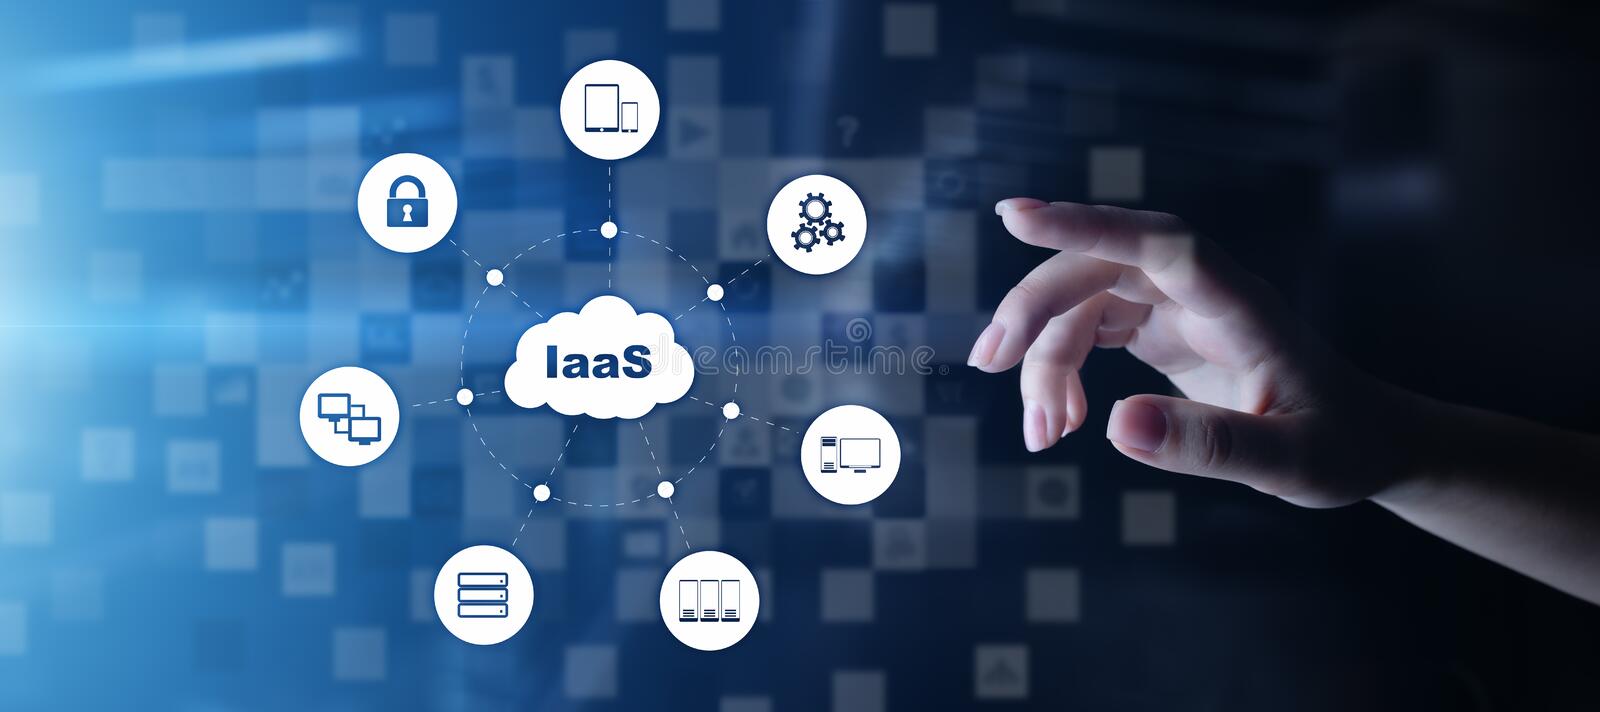 iaas-infrastructure-as-service-networking-application-platform-internet-technology-concept-iaas-infrastructure-